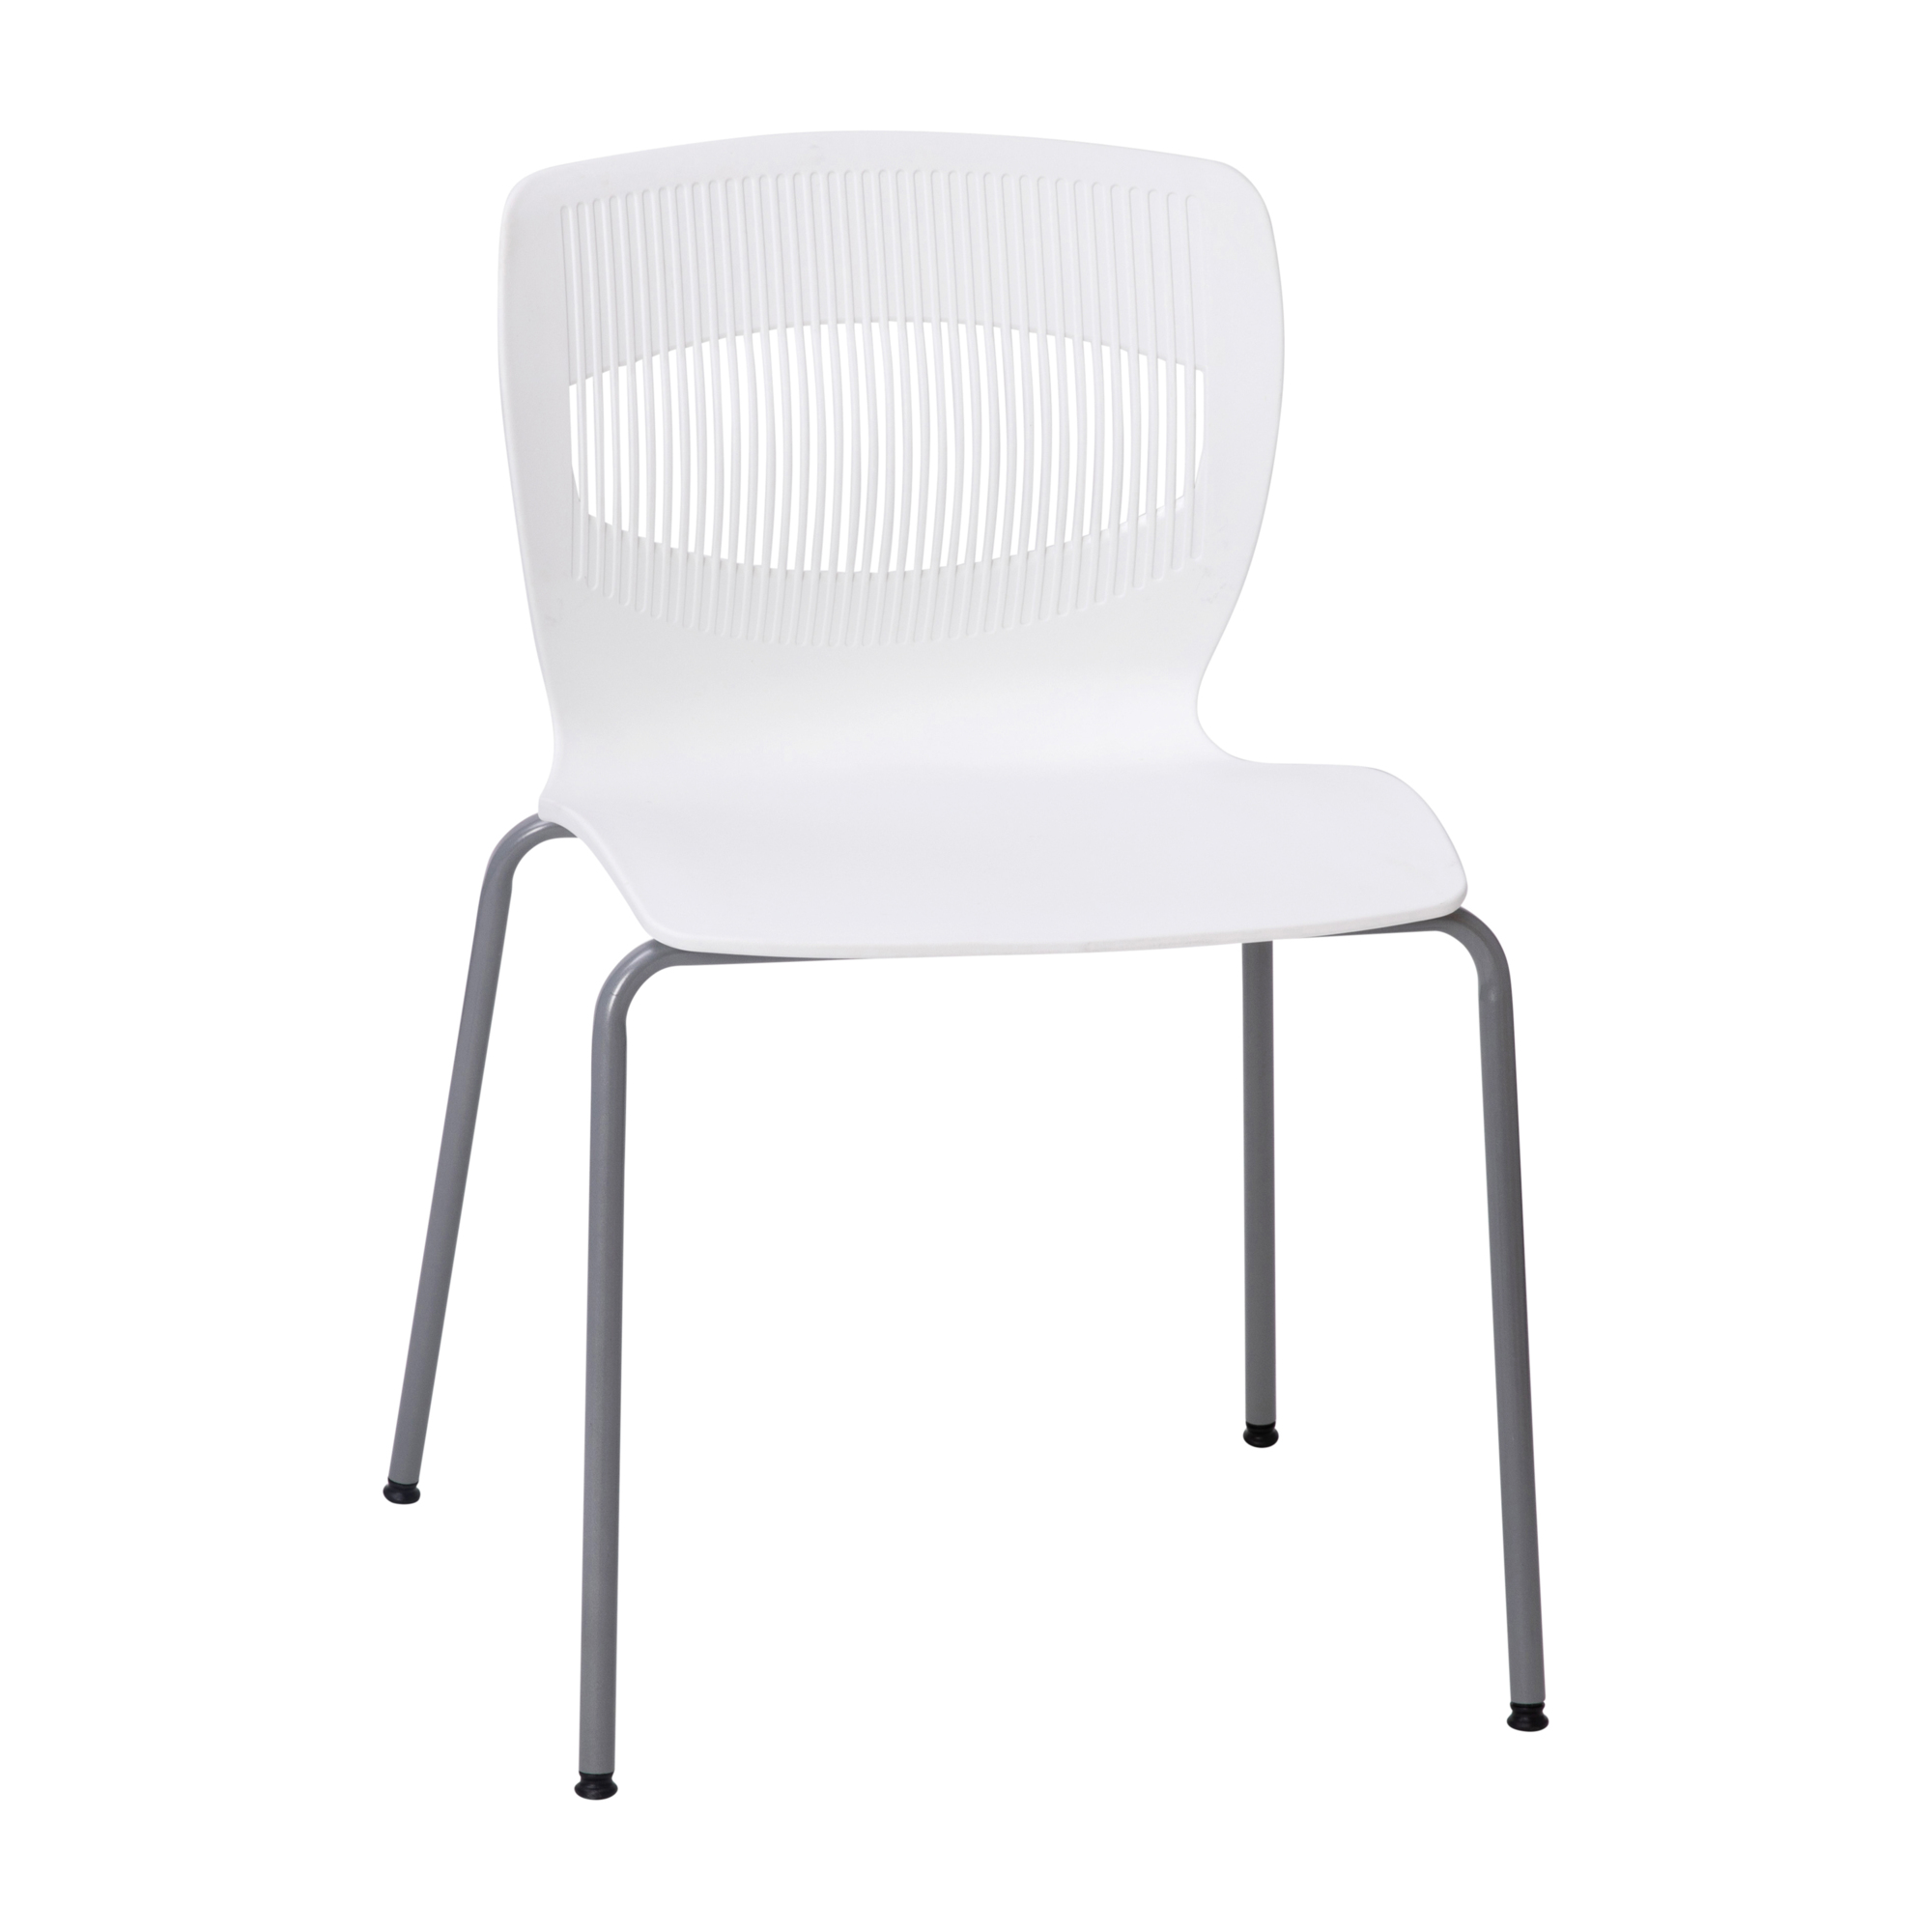 Flash Furniture, White Plastic Stack Chair with Lumbar Support, Primary Color White, Included (qty.) 1, Model RUTNC618WH